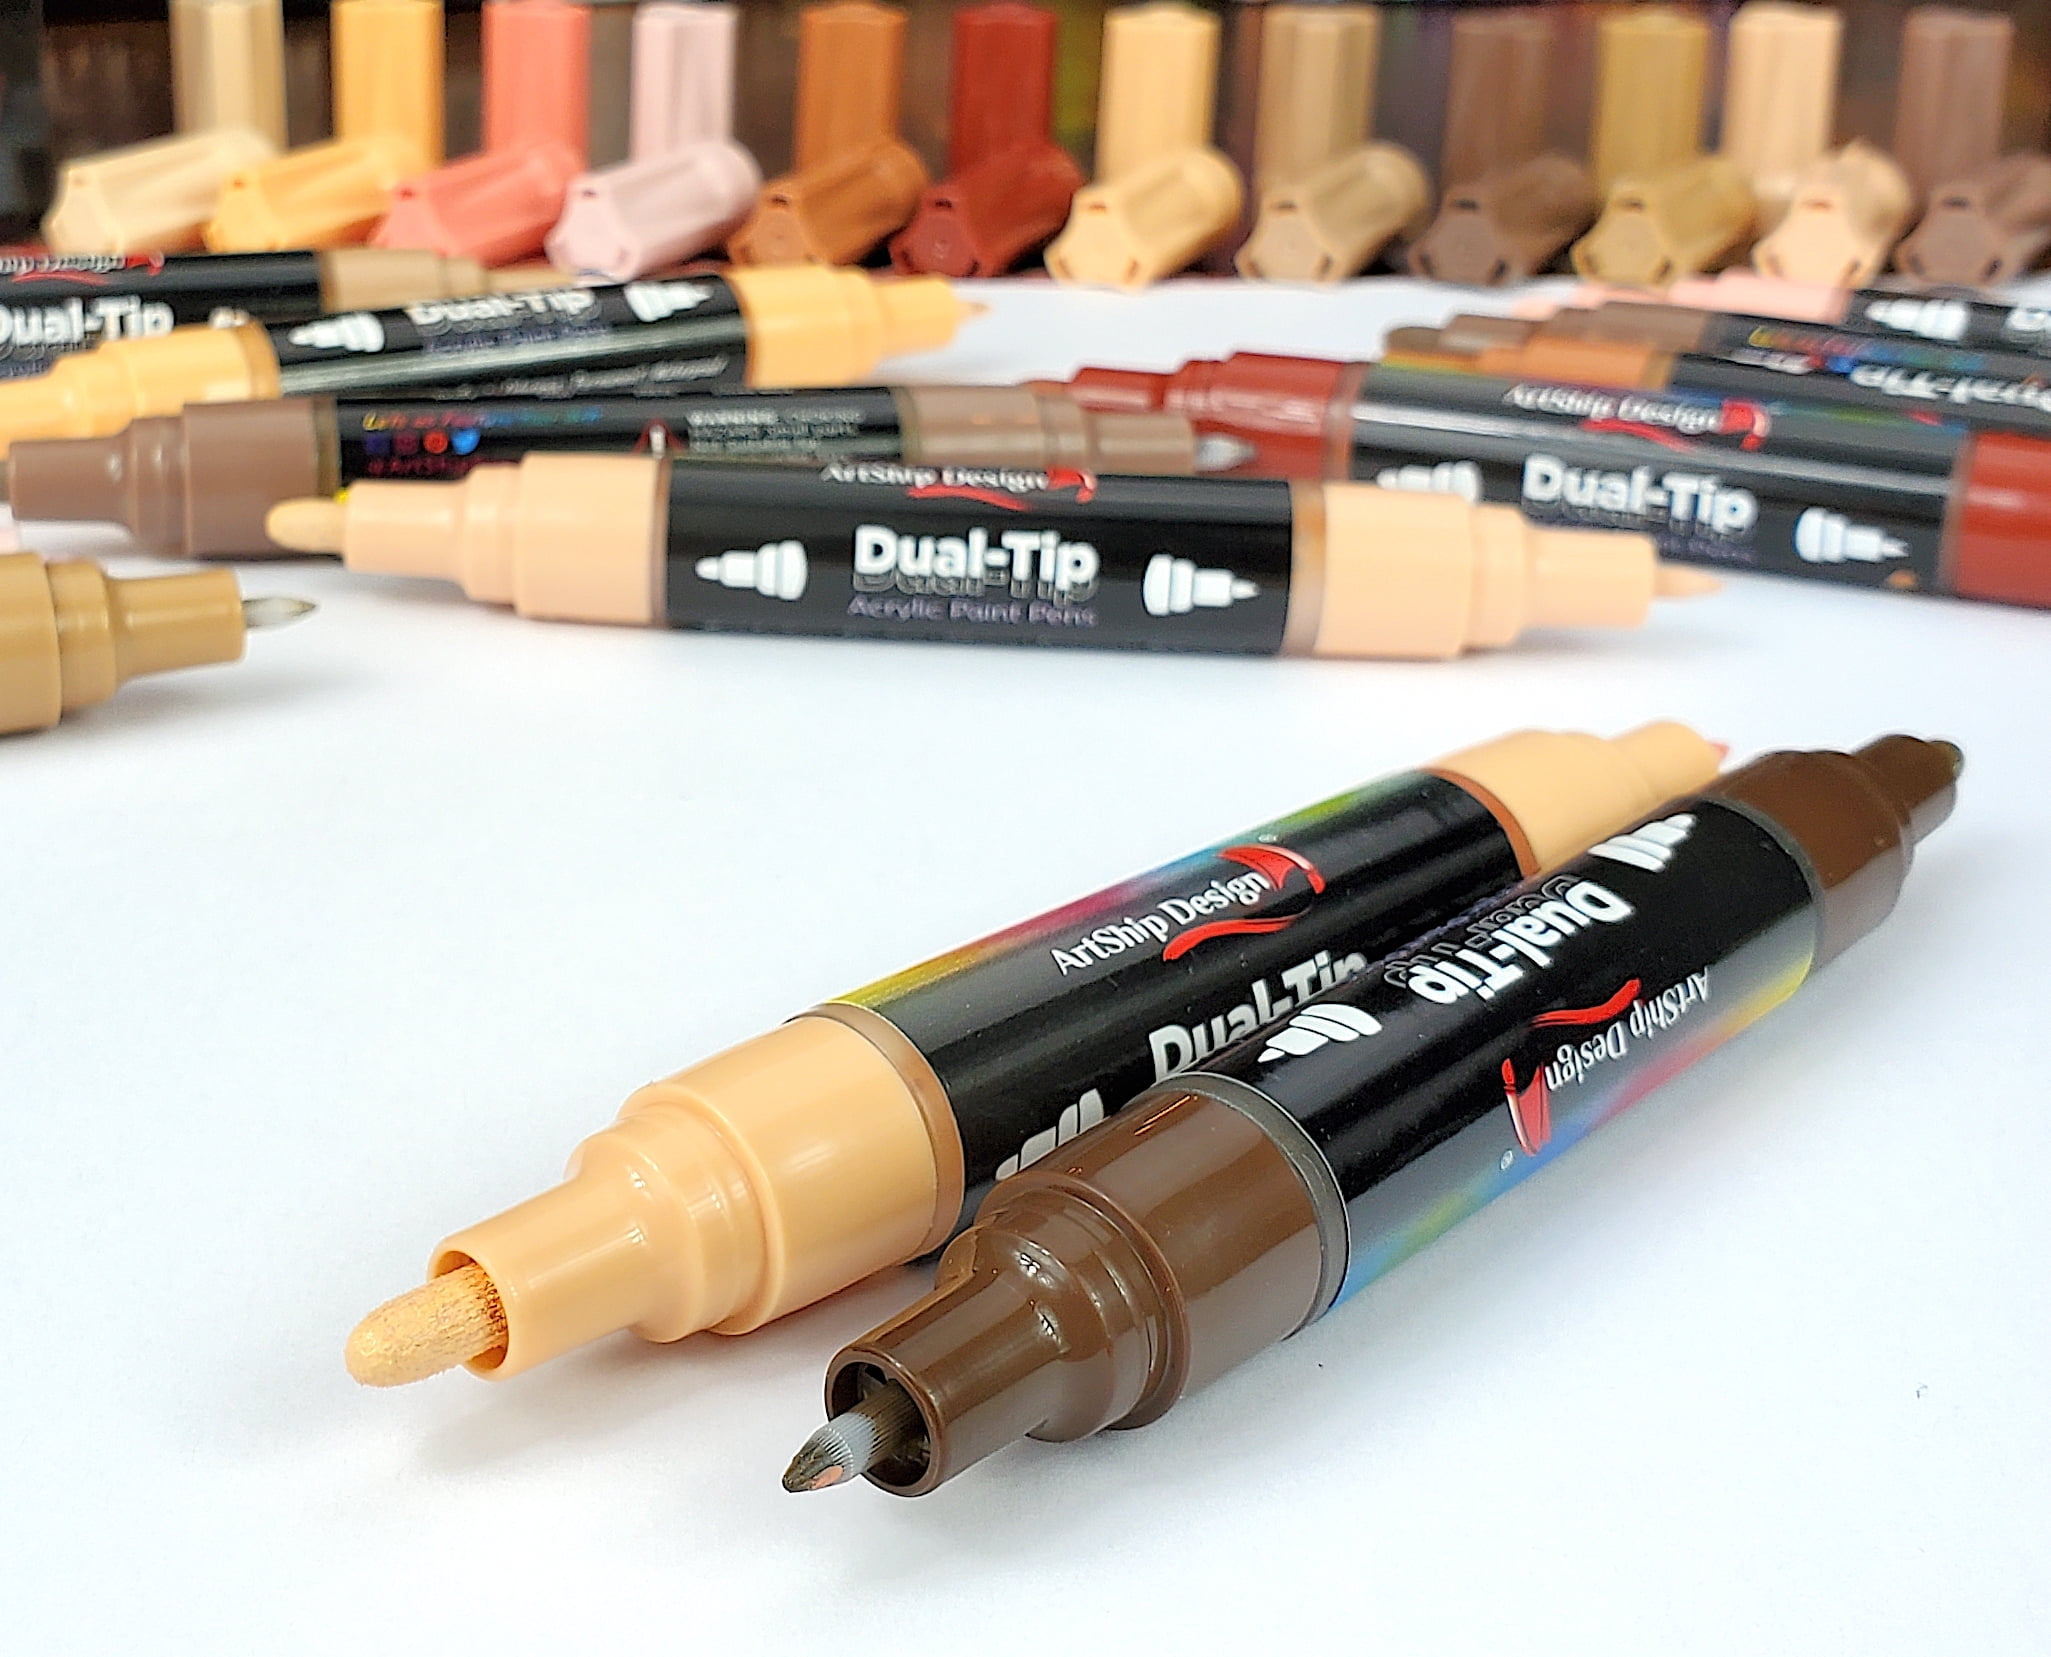 16 Dual-Tip Acrylic Paint Pens, Both Extra Fine and Medium Tip